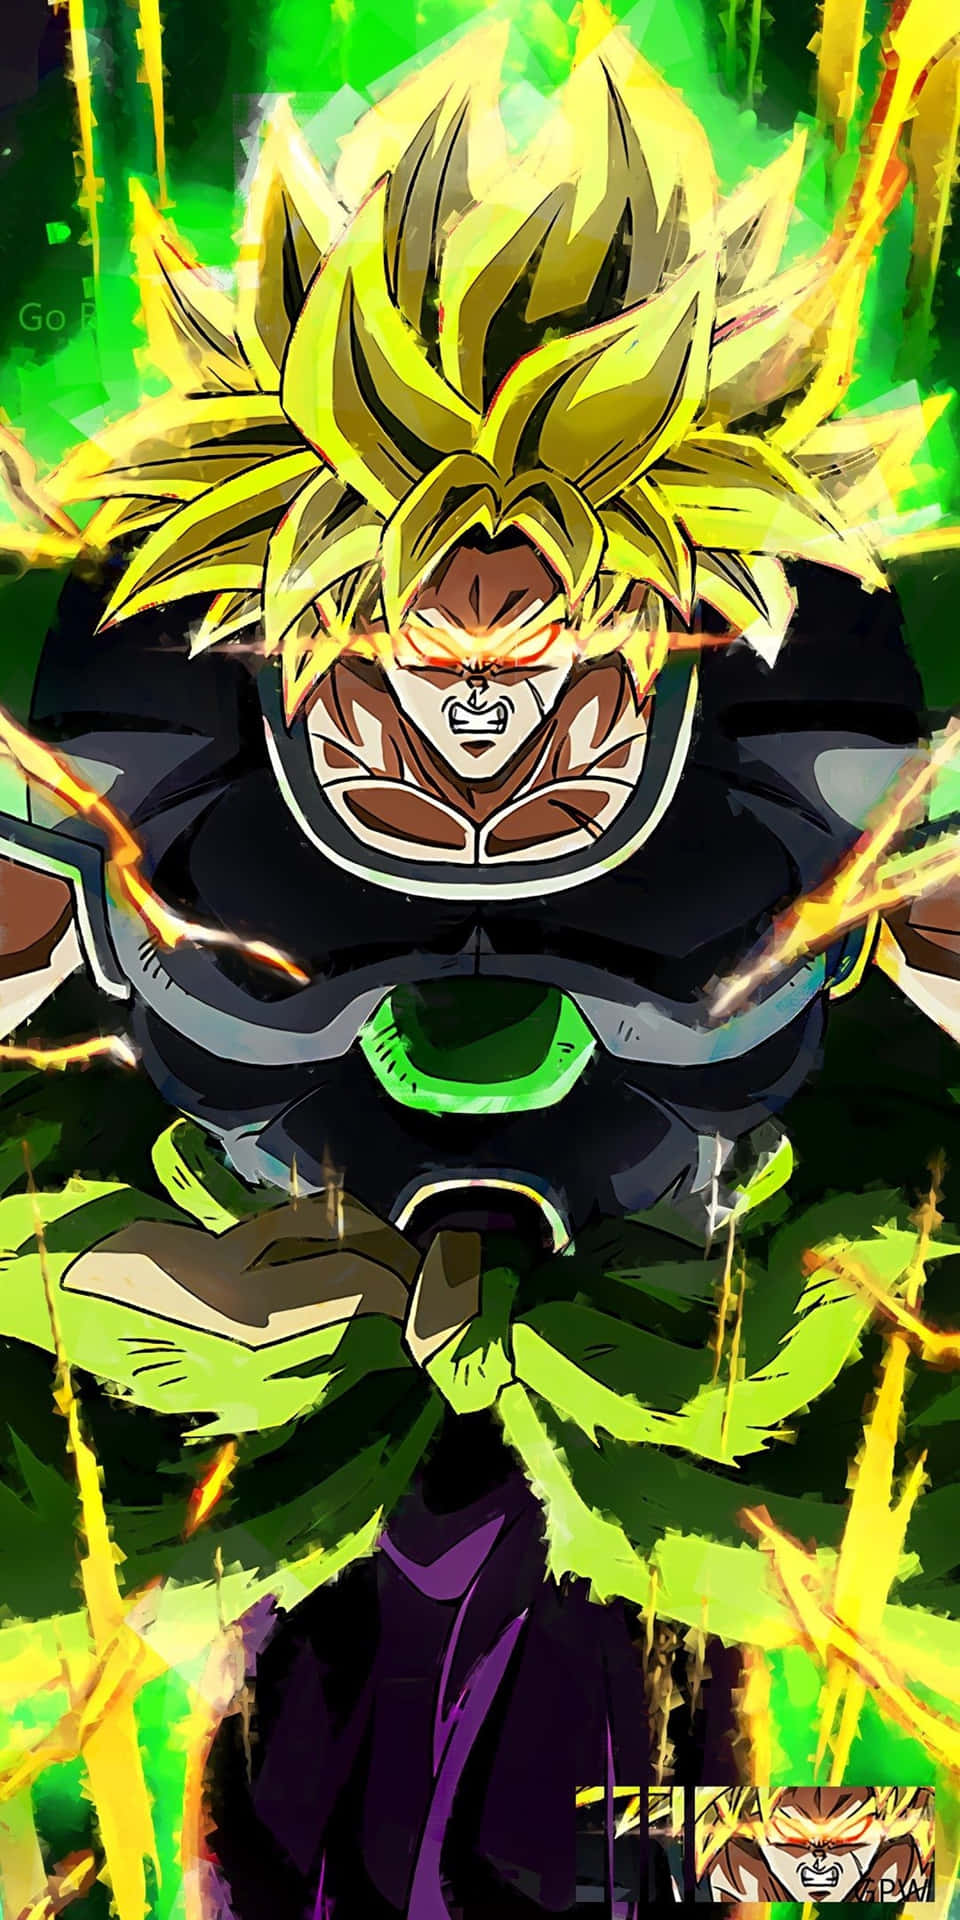 Download This Dragon Ball Super Broly Wallpaper To Get Hyped For The Movie